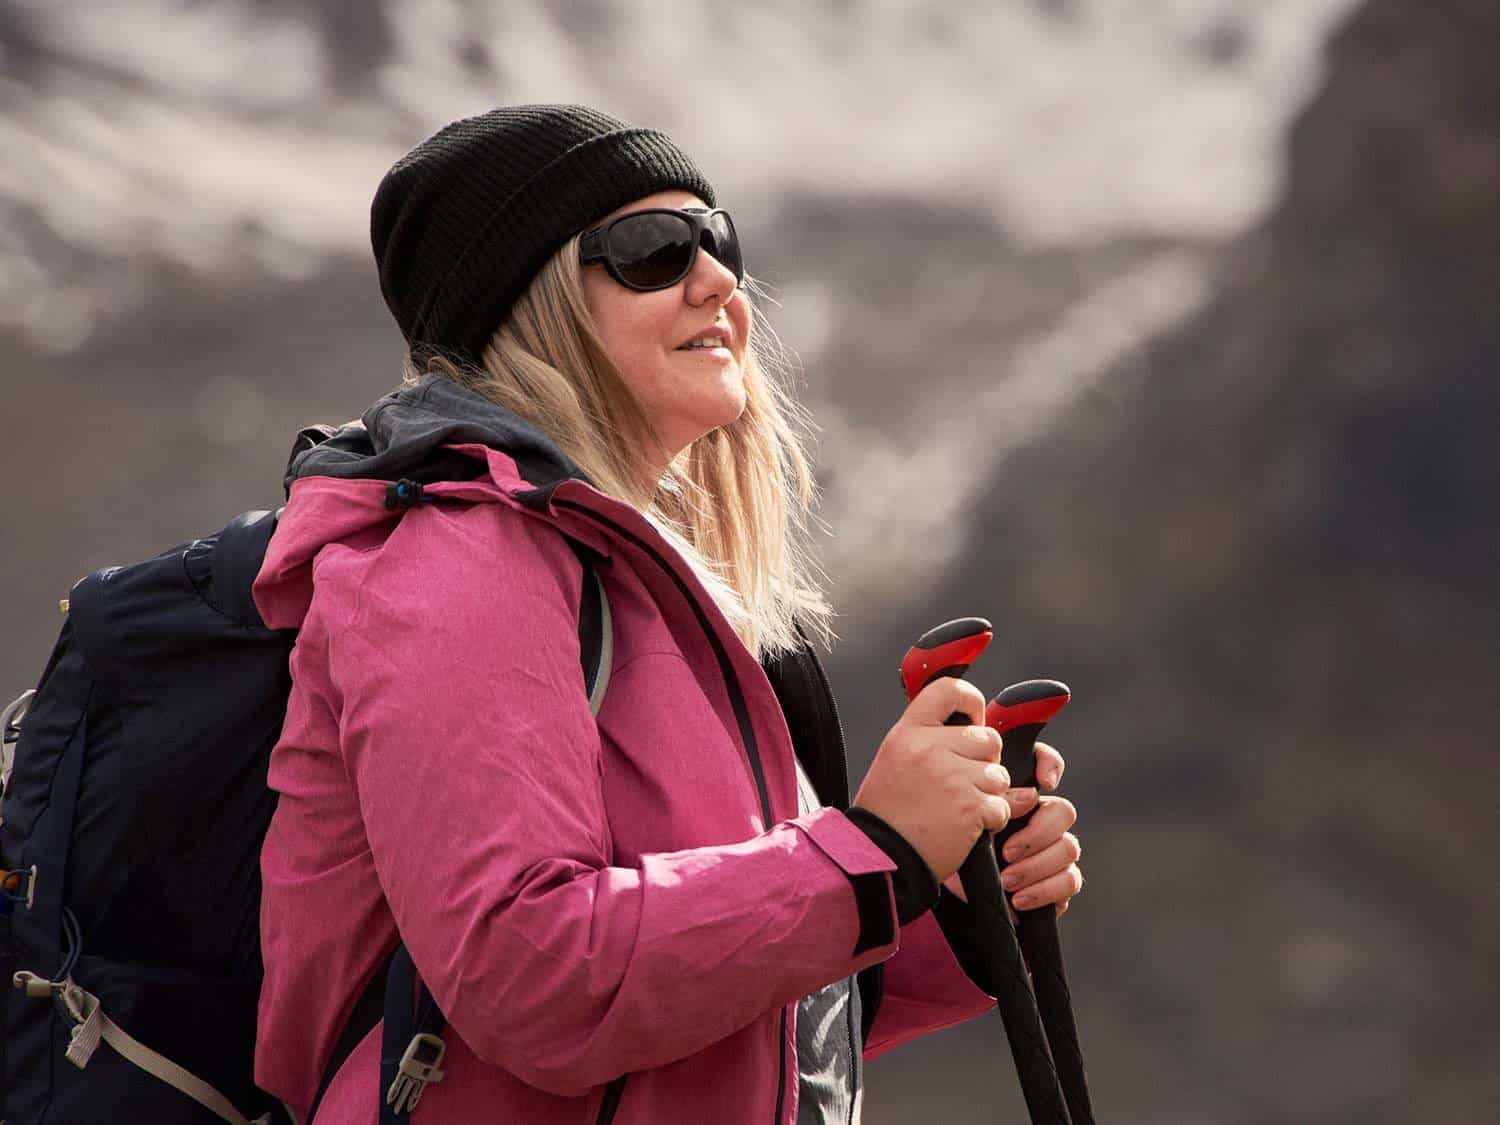 Person stood in pink coat, blue backpack, black hat and sunglasses using hiking poles with out of focus mountain scene in background